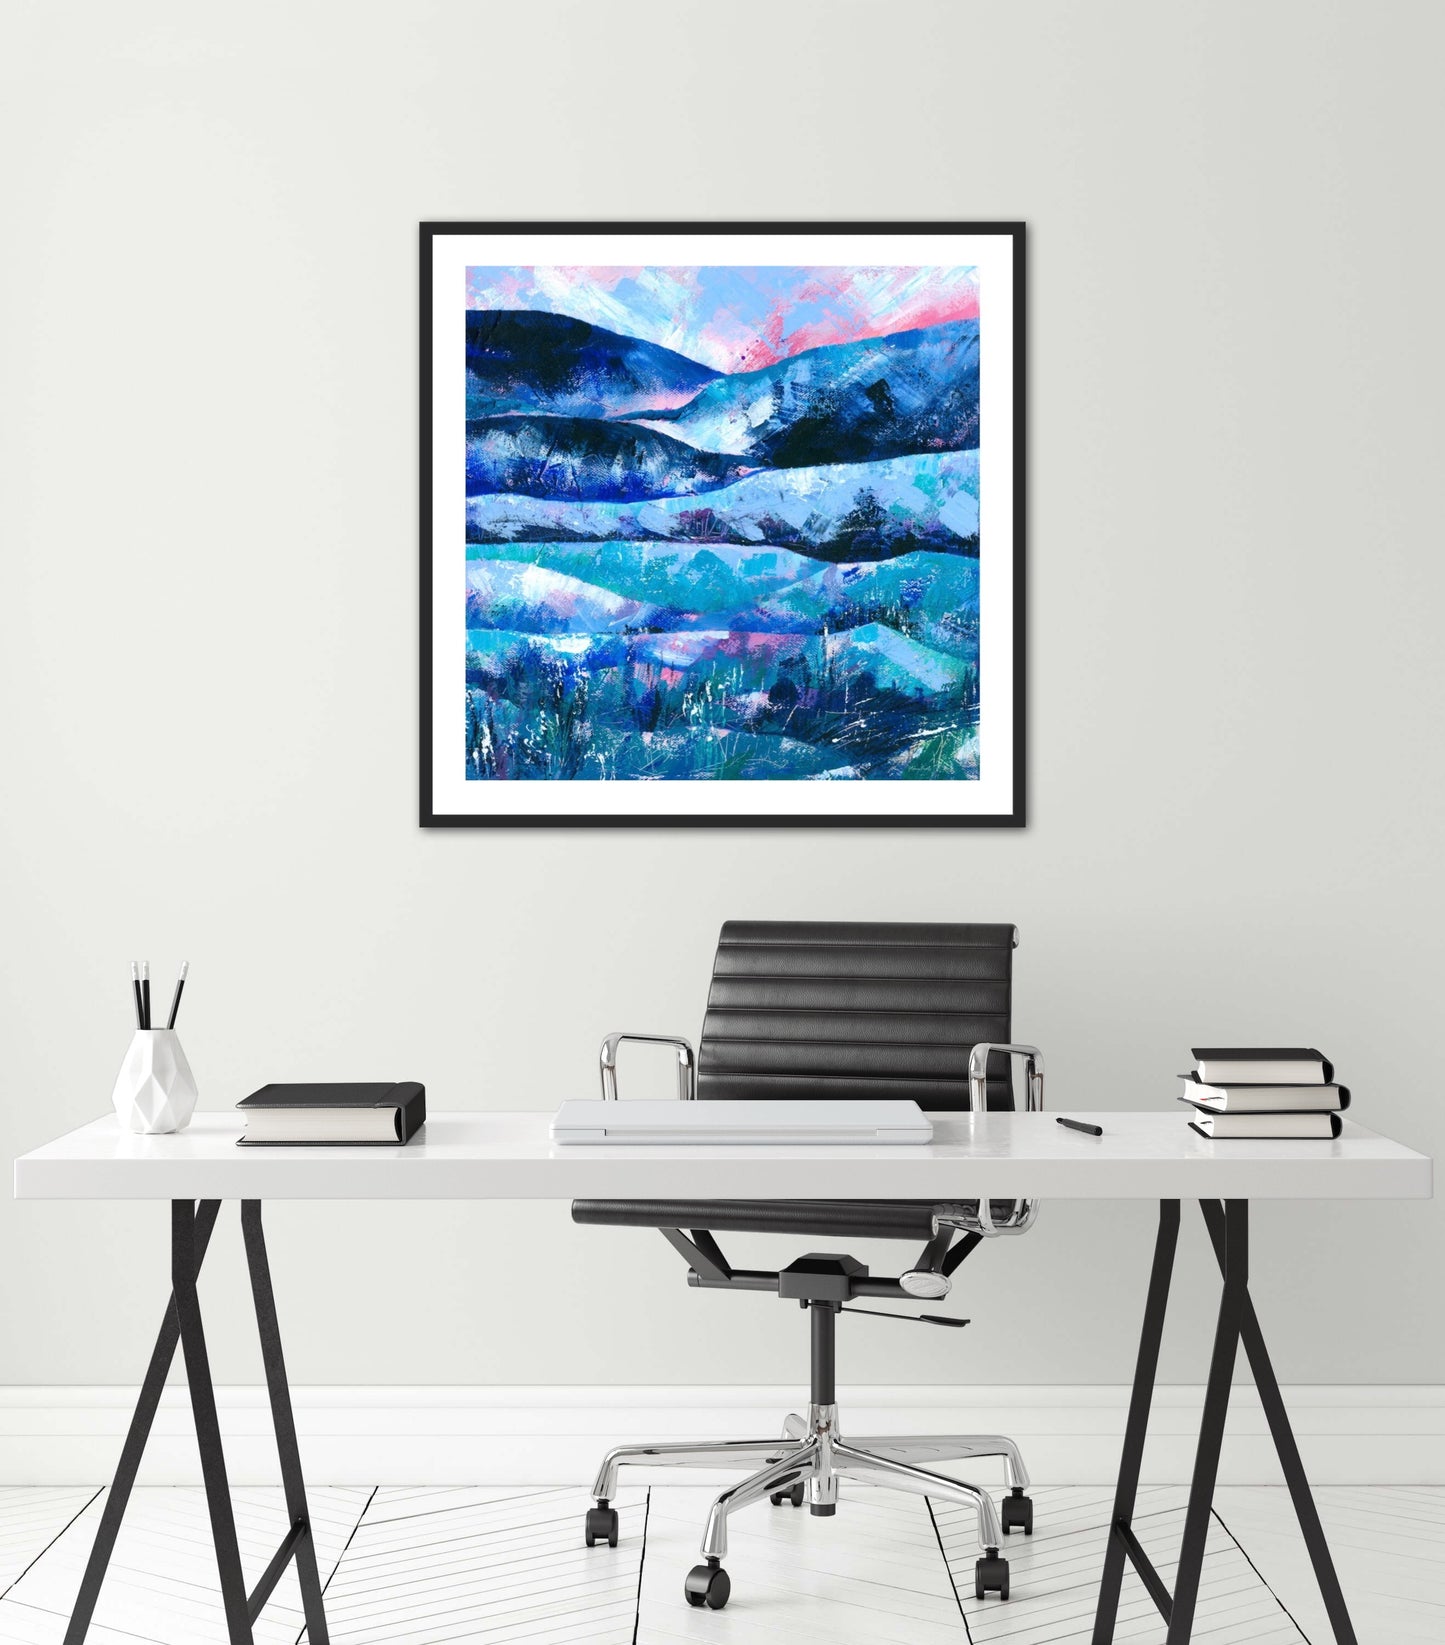 Tranquility abstract landscape painting fine art print displayed in a black frame on a white wall above a desk in a minimalist white office